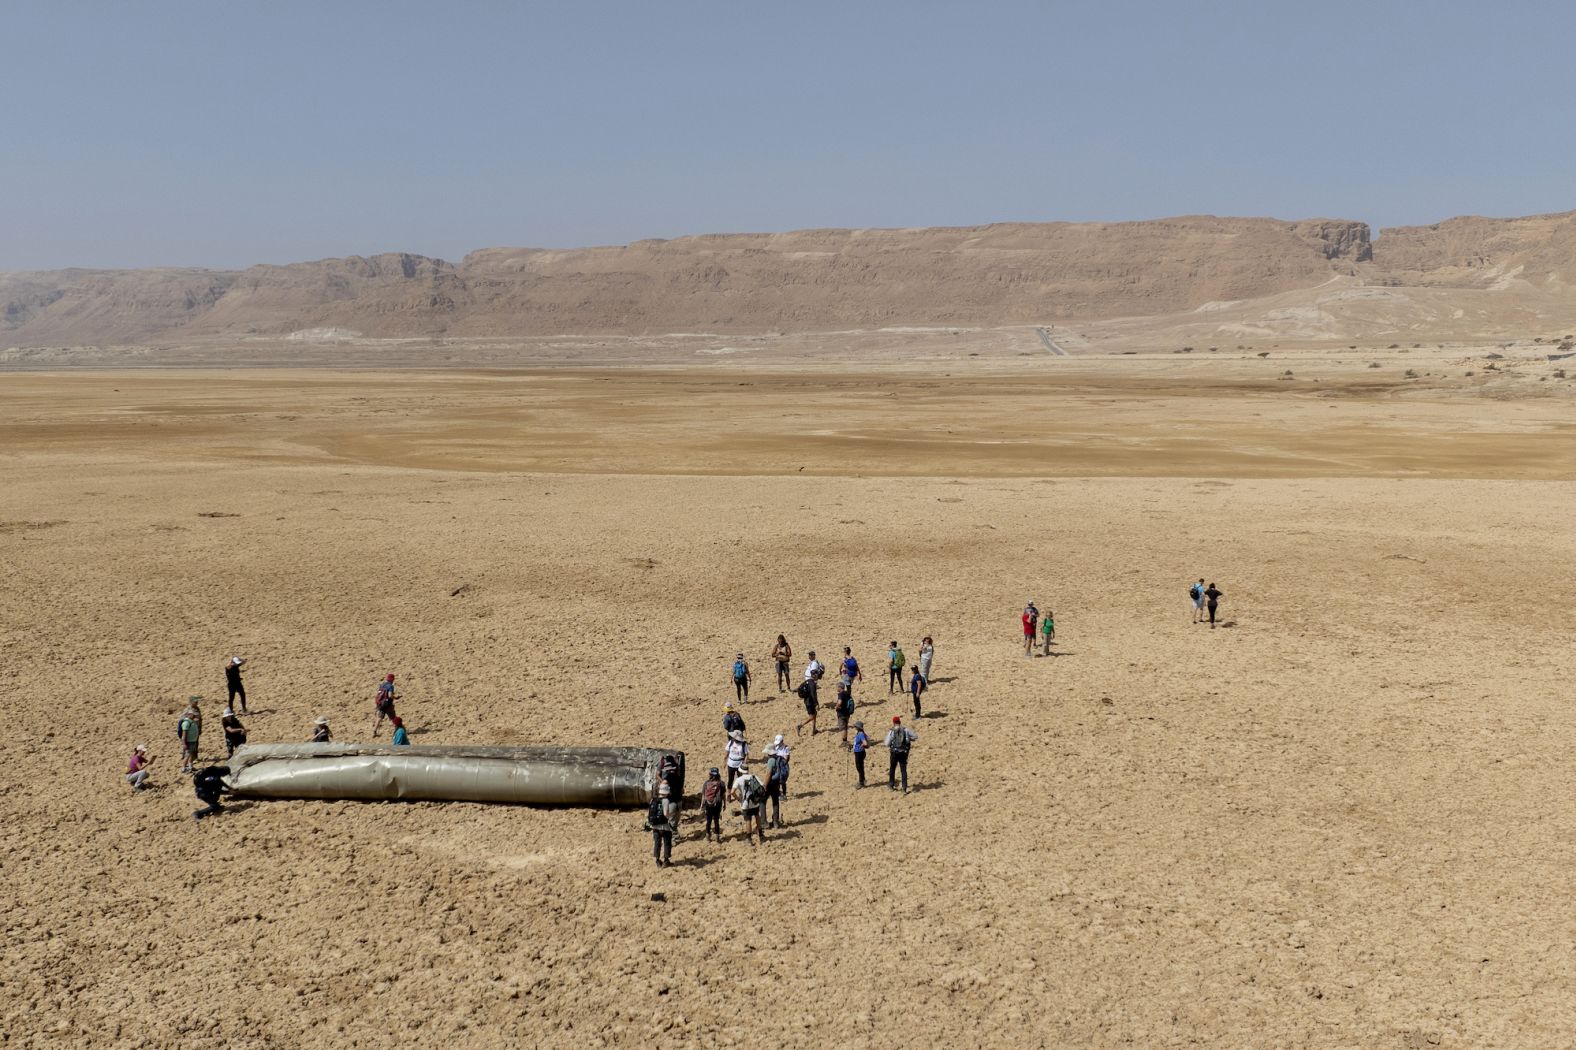 People gather around a piece of a ballistic missile near the Dead Sea in Israel on Saturday, April 20. Almost all the ballistic missiles and drones Iran launched at Israel in <a href="https://www.cnn.com/2024/04/14/middleeast/israel-air-missile-defense-iran-attack-intl-hnk-ml/index.html" target="_blank">an unprecedented attack</a> this month were intercepted and failed to meet their mark, according to Israeli and American officials. The attack followed an Israeli strike on an Iranian diplomatic complex in Syria.